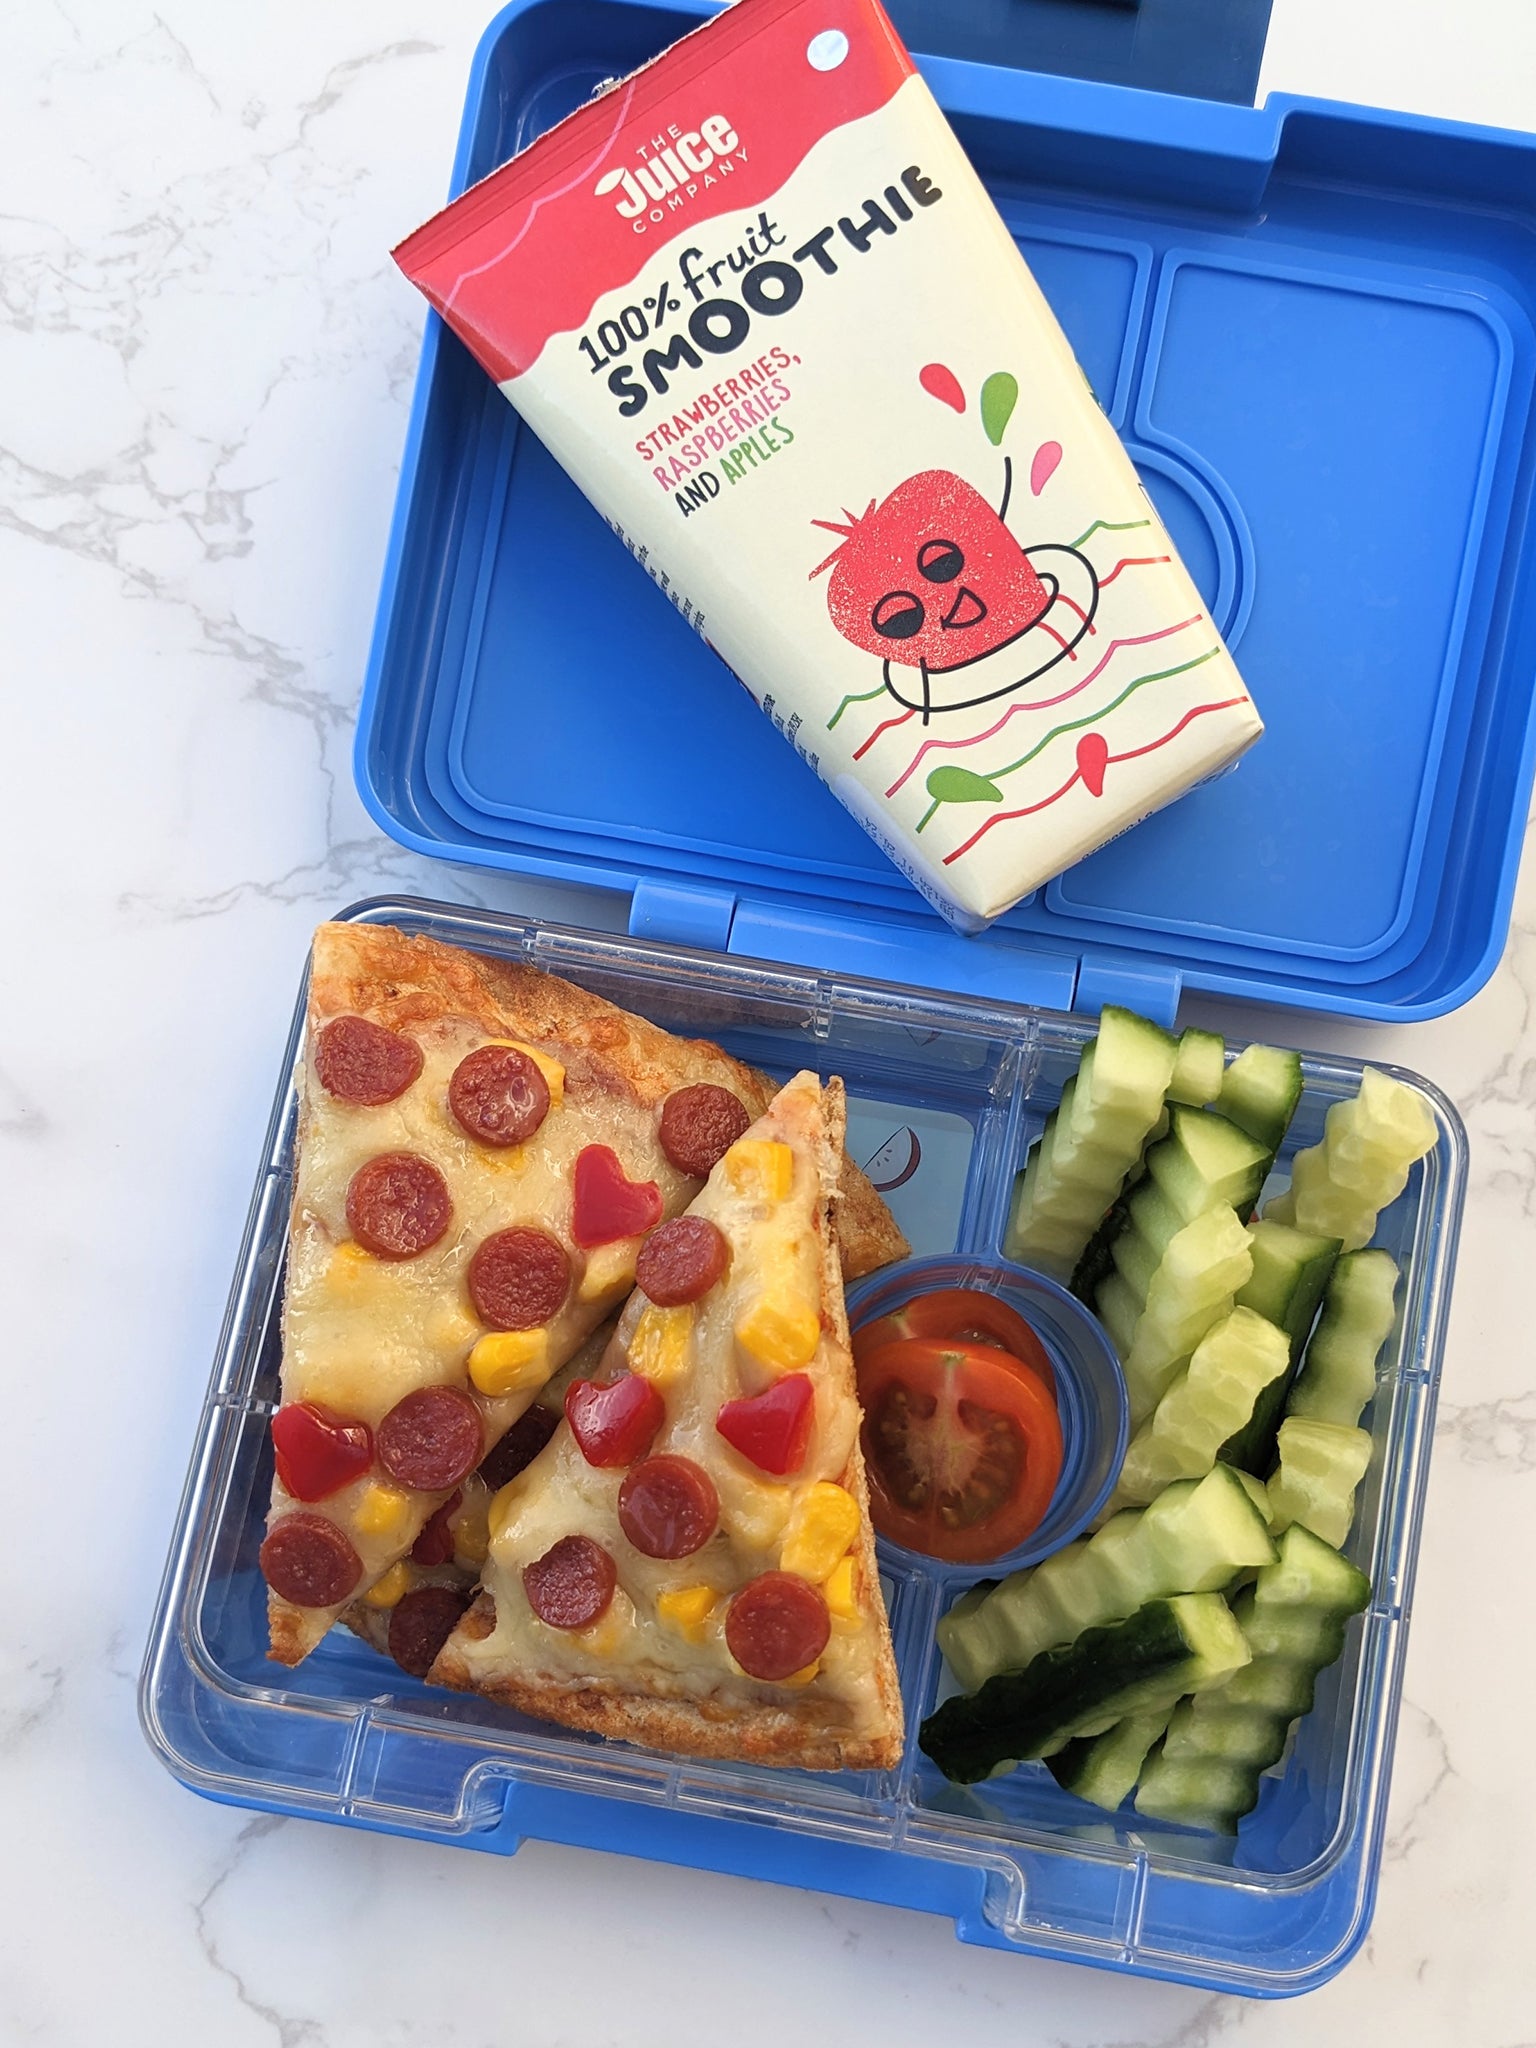 A great lunchbox main with carbs, protein and added veggies